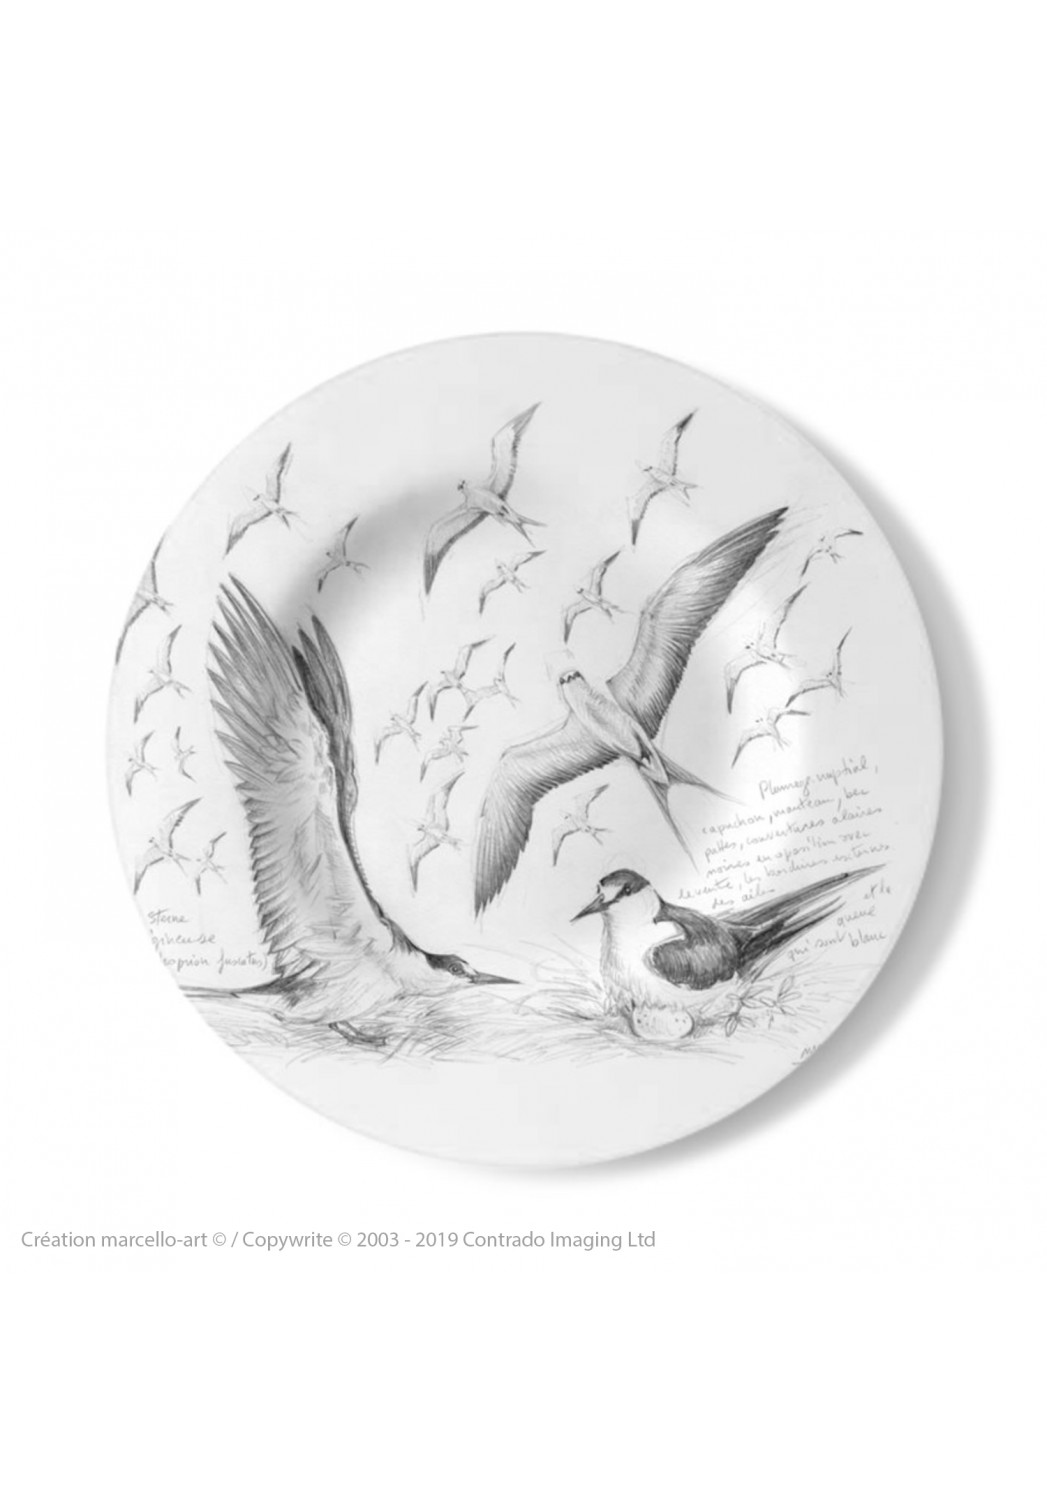 Marcello-art: Decorating Plates Decoration plates 337 Sooty terns